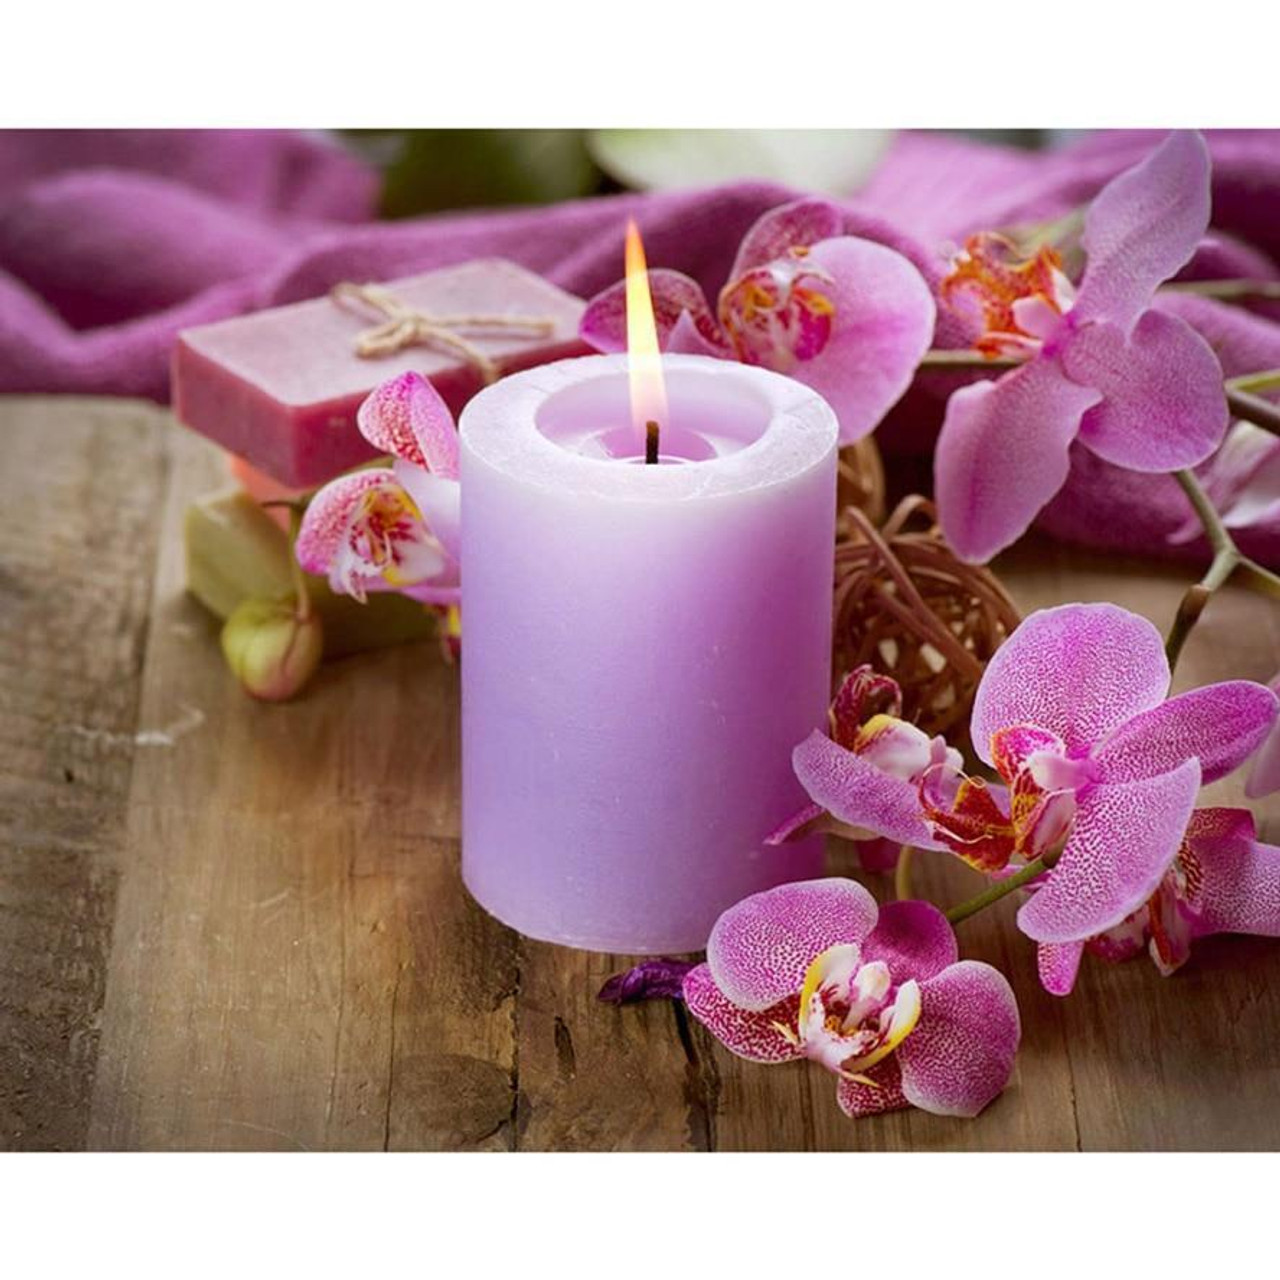 5D Diamond Painting Lavender Orchid and Candle Kit - Bonanza